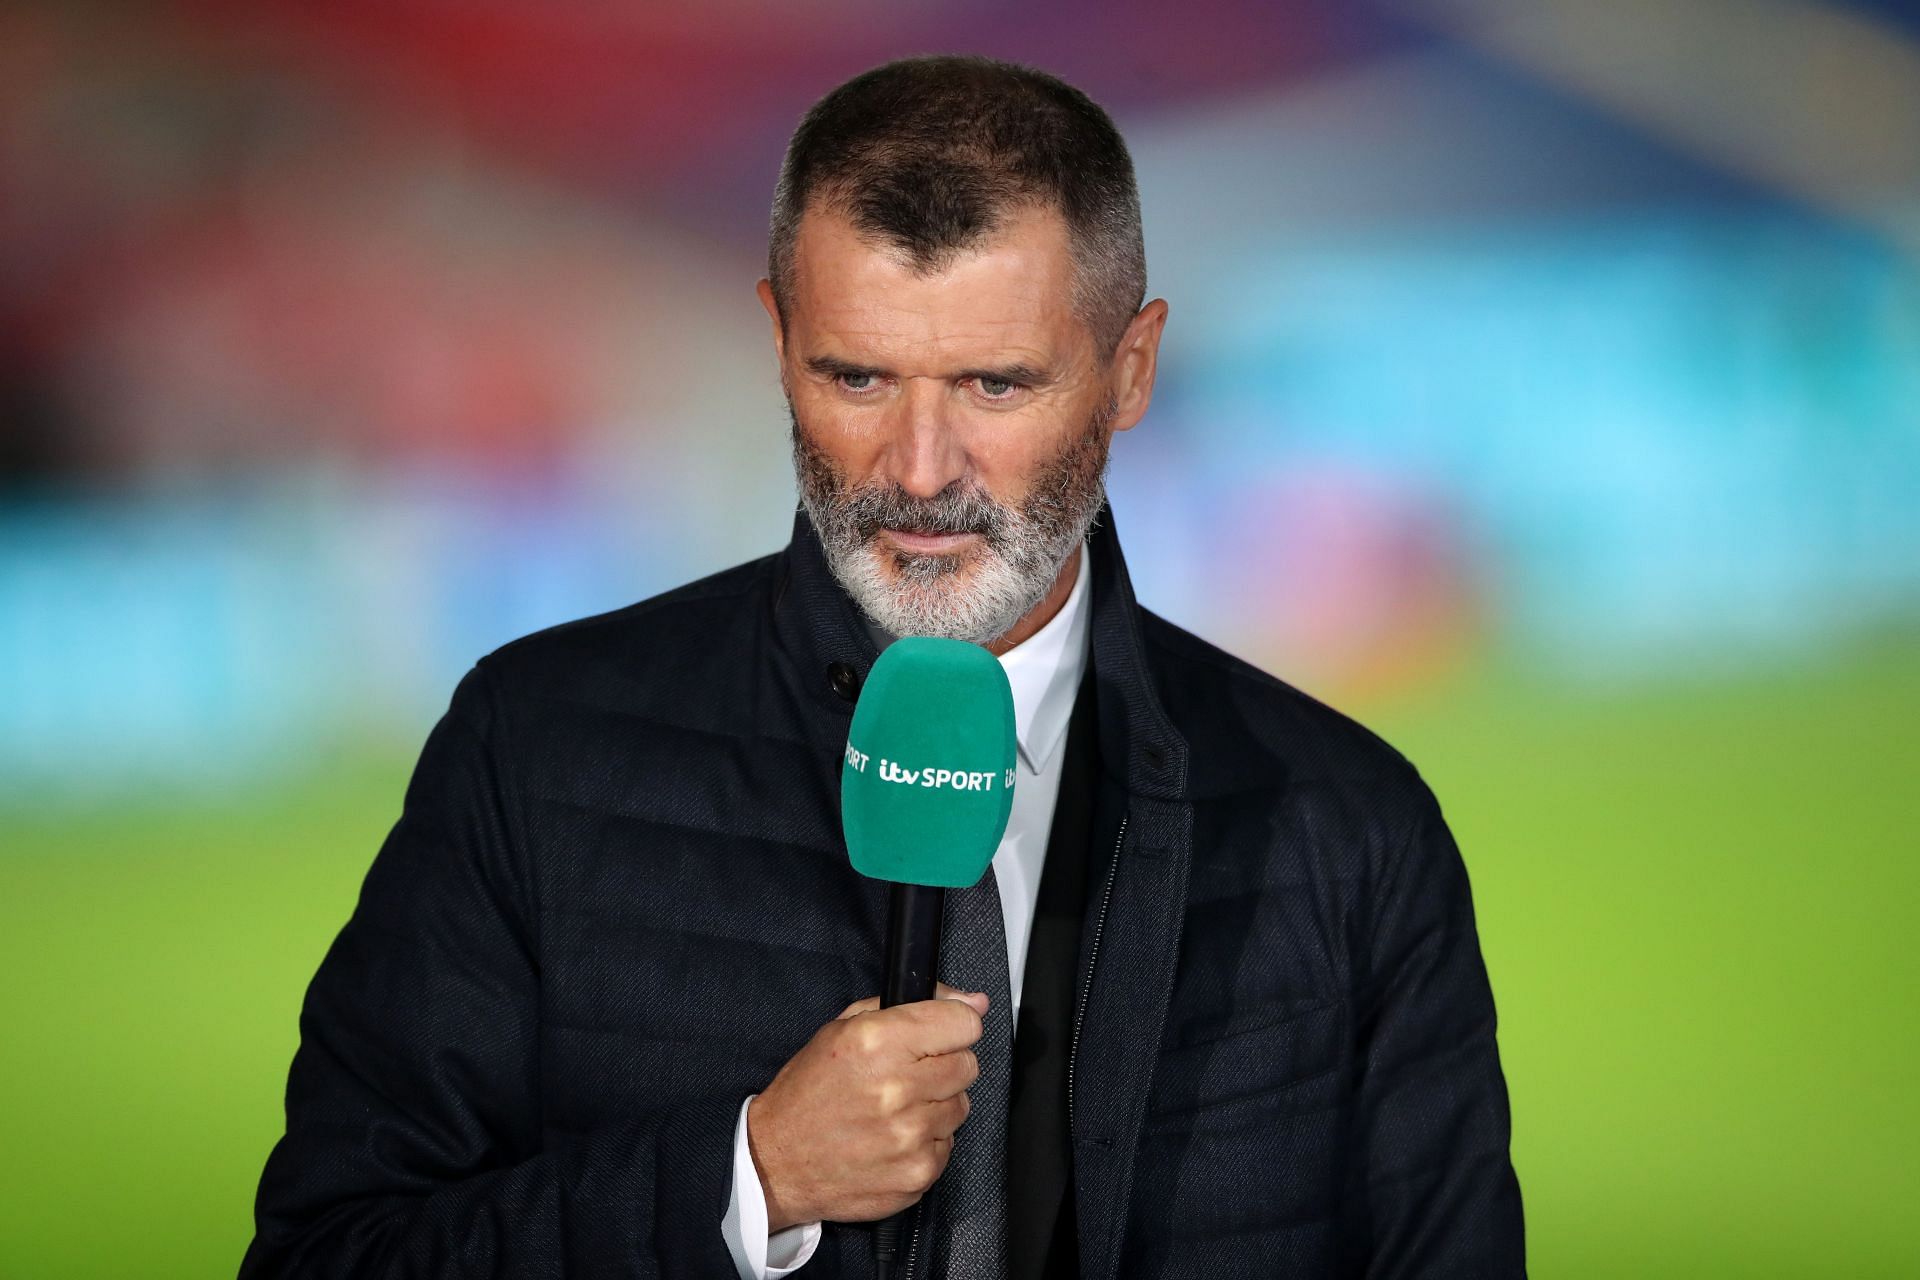 Roy Keane during the England v Wales - International Friendly